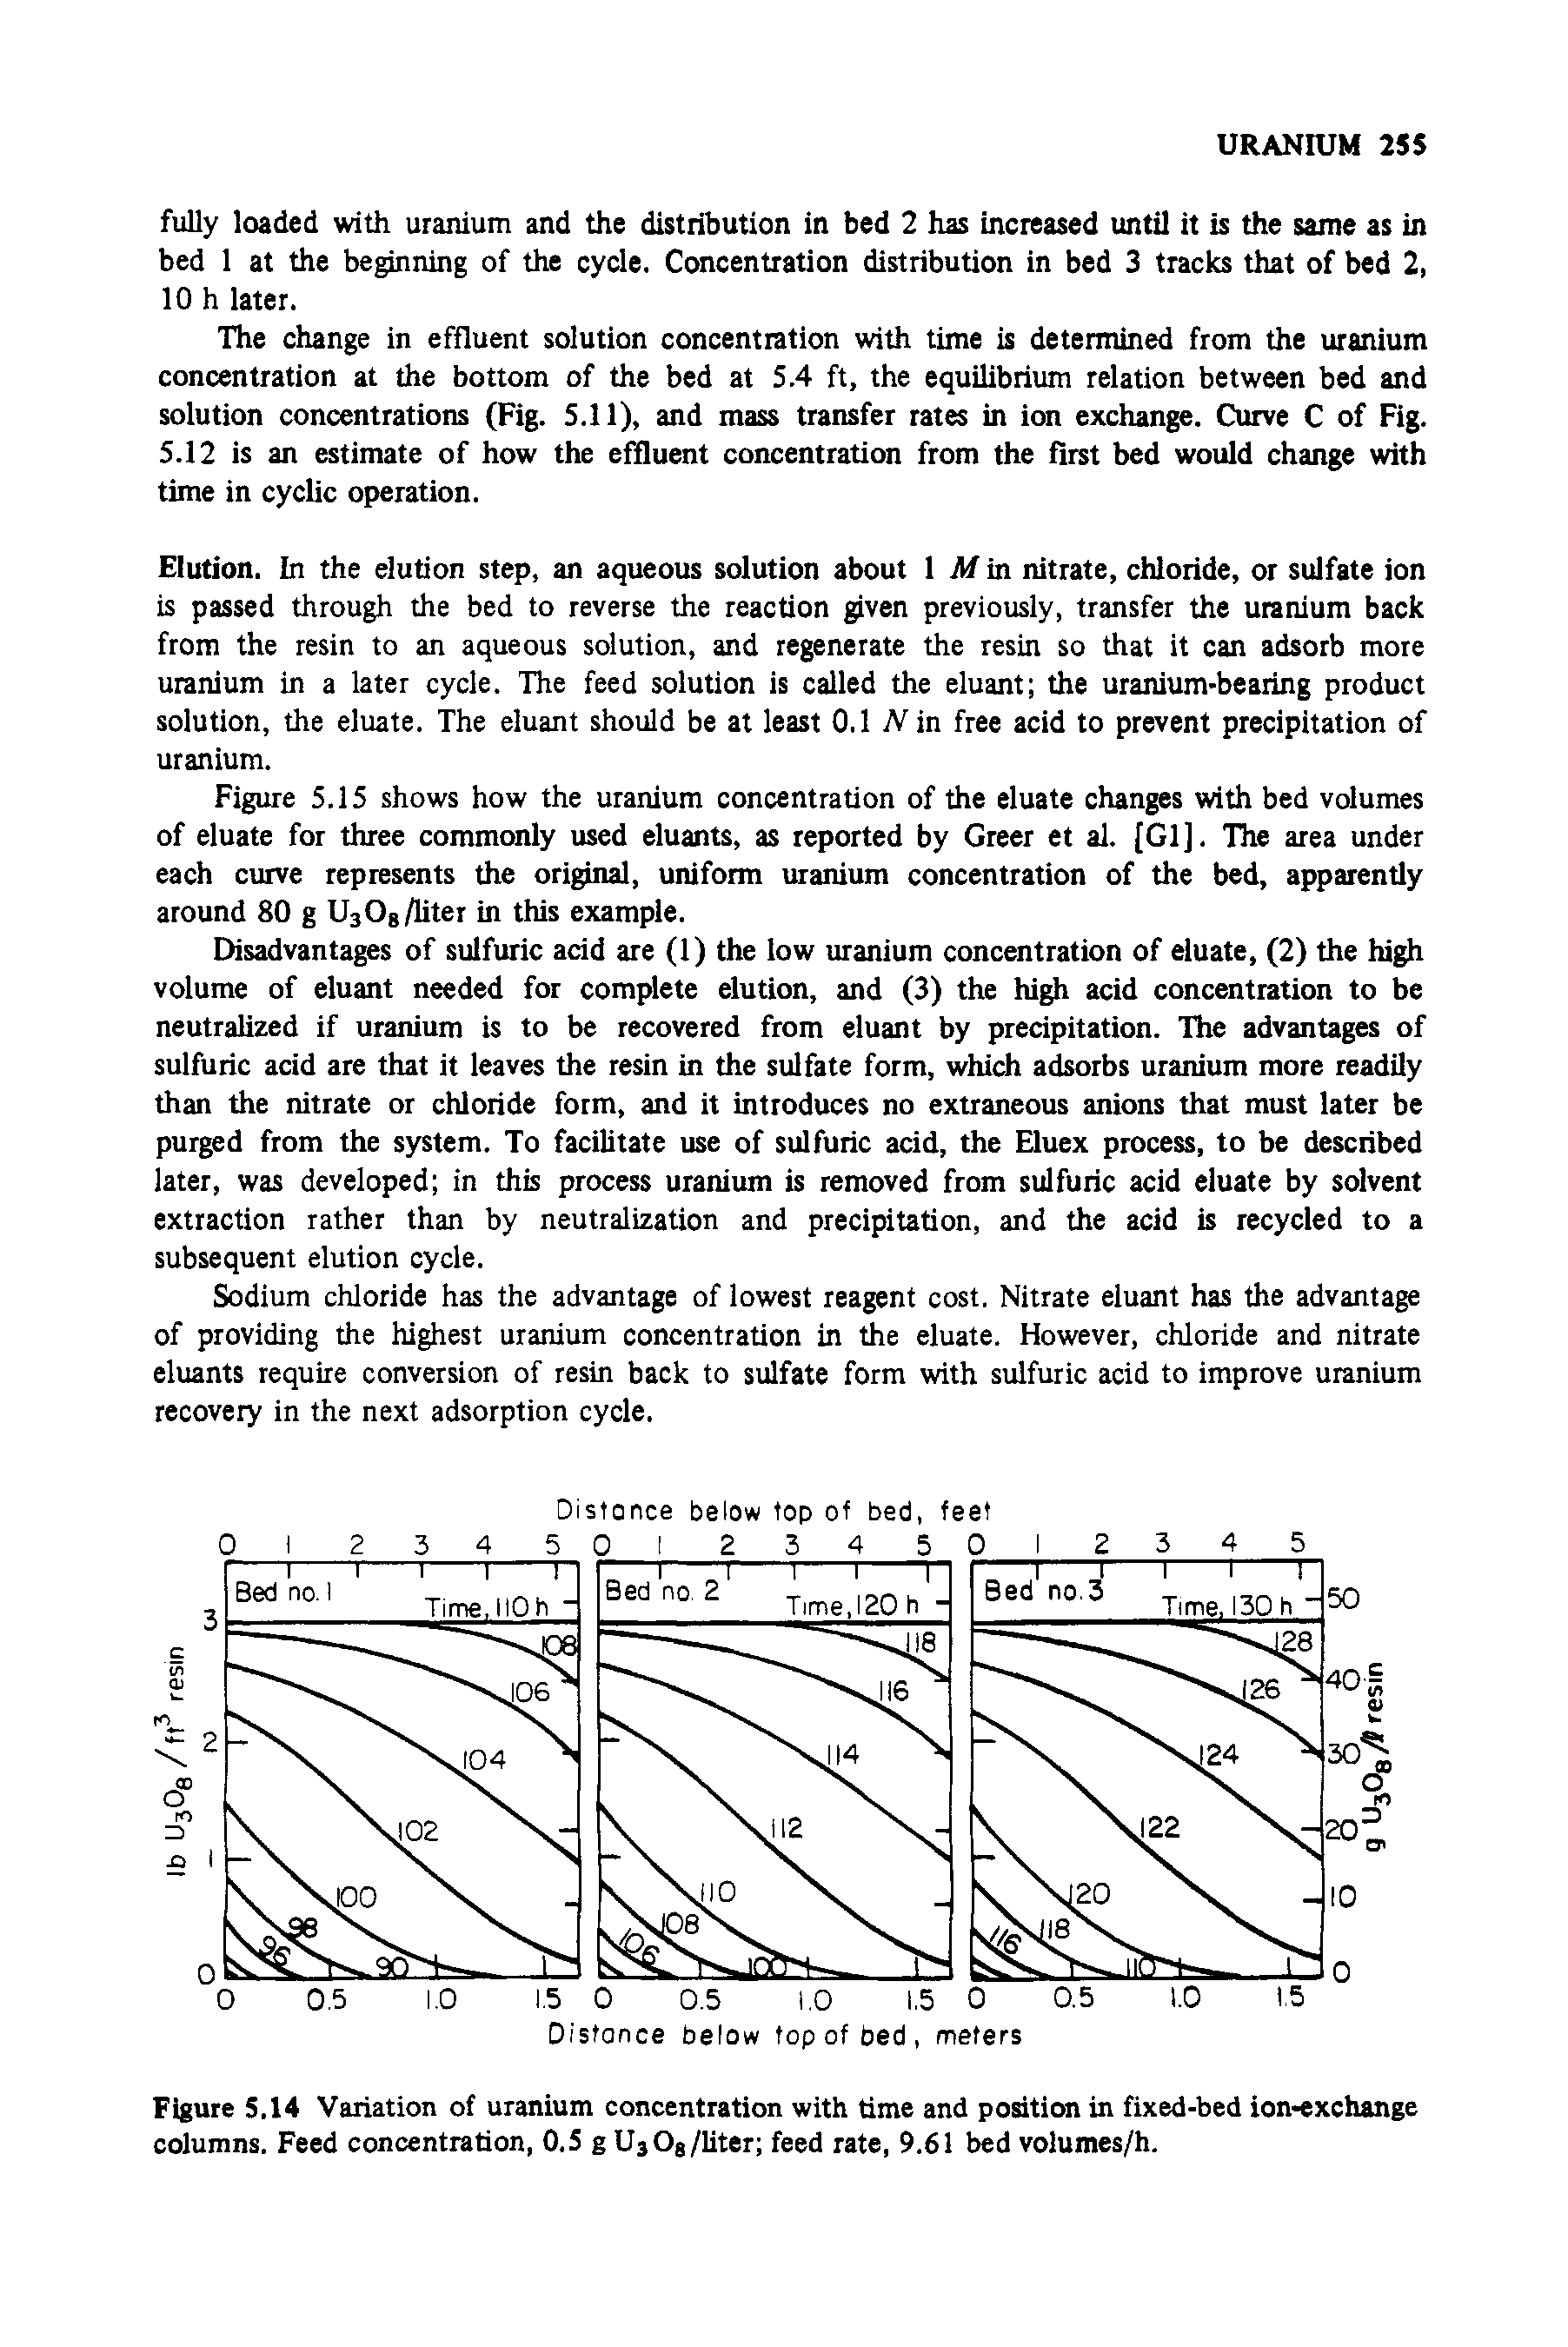 Figure 5.14 Variation of uranium concentration with time and position in fixed-bed ion-exchange columns. Feed concentration, 0.5 g UgOg/liter feed rate, 9.61 bed volumes/h.